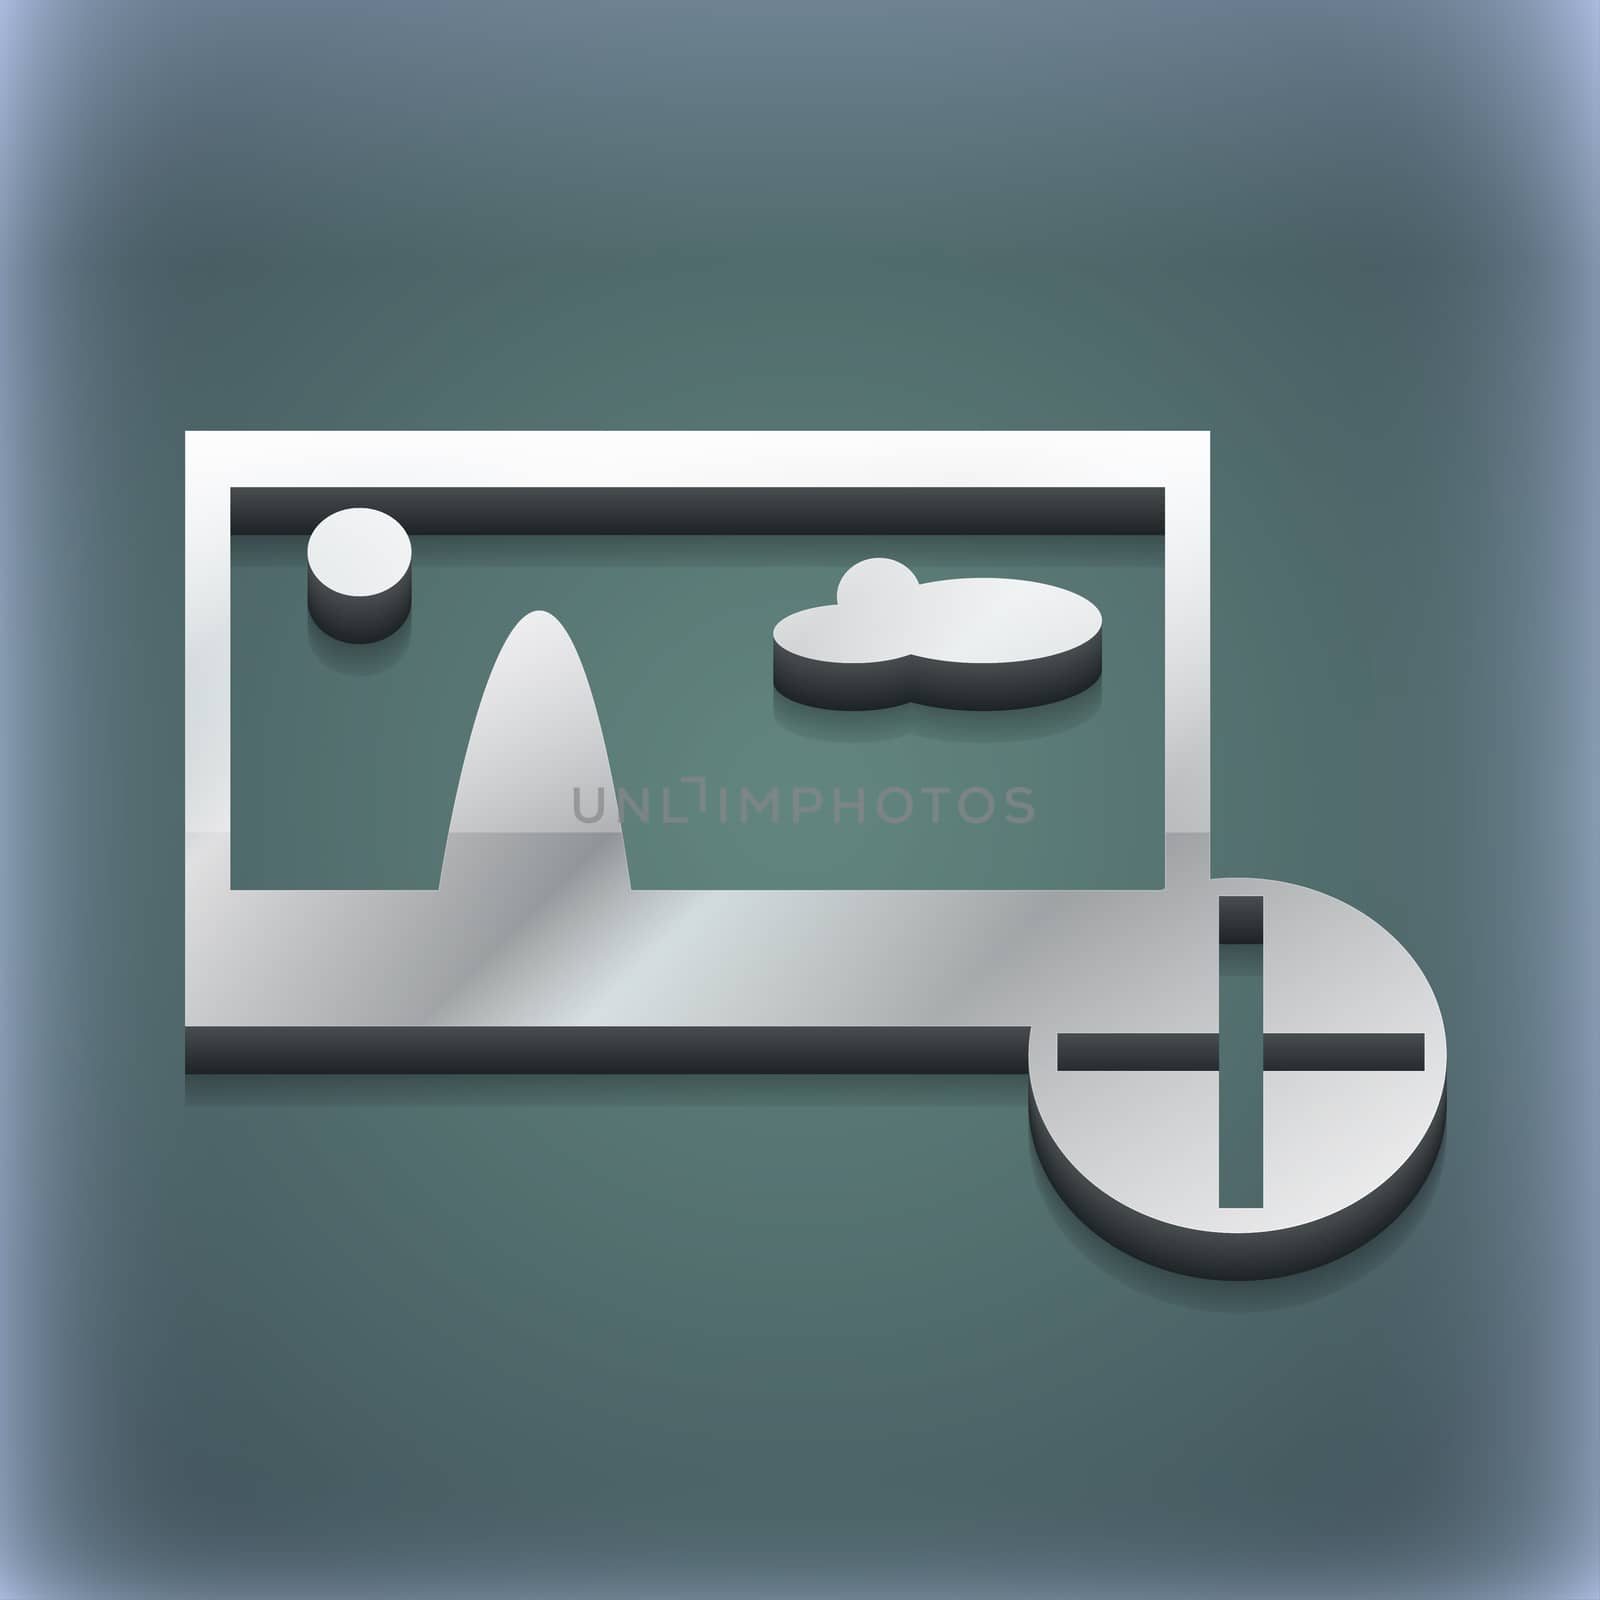 Plus, add File JPG icon symbol. 3D style. Trendy, modern design with space for your text illustration. Raster version